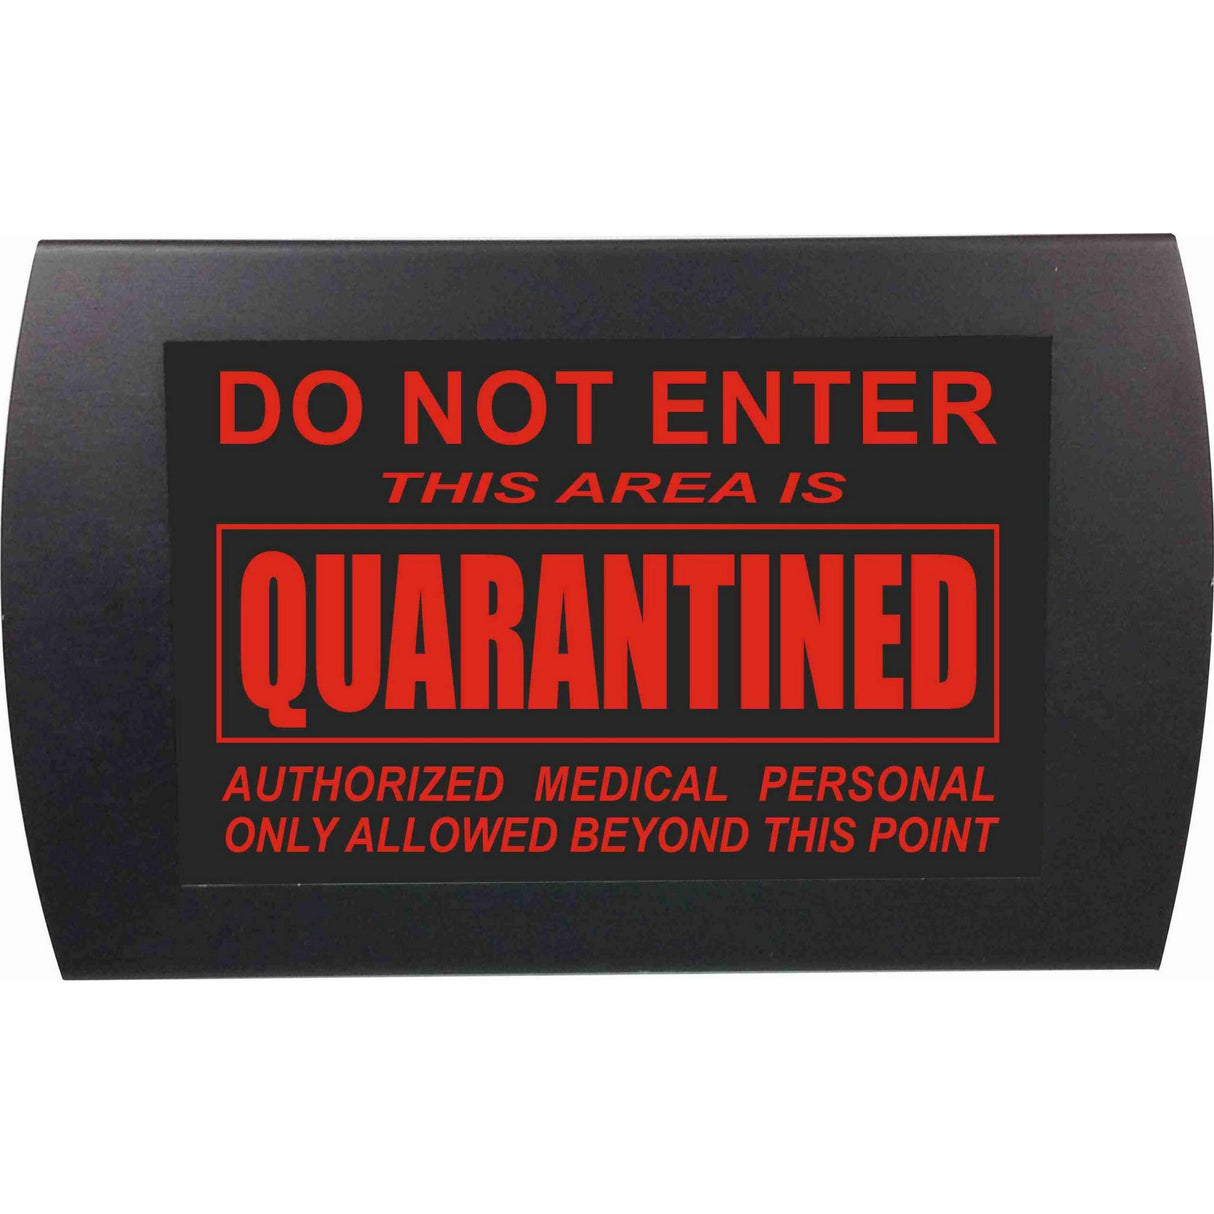 American Recorder Technologies OAS-2047M-RD-4B "DO NOT ENTER - QUARANTINED" Wall Mount LED Lighted Sign, Red